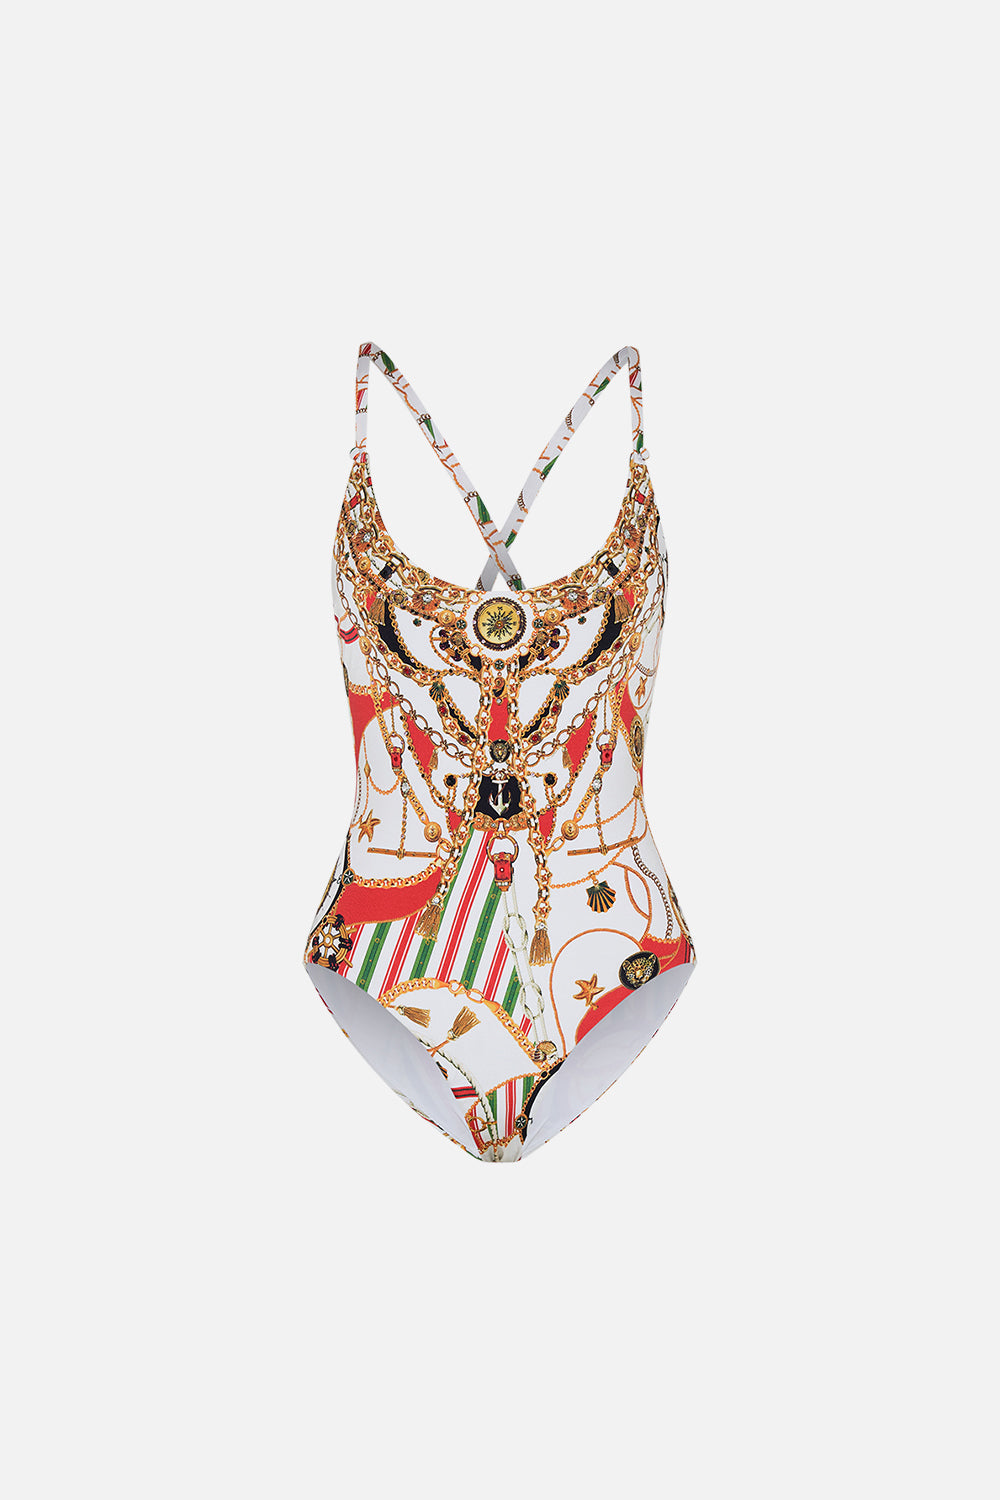 Product view of CAMILLA designer one piece swimsuit in Saluti Summertime print